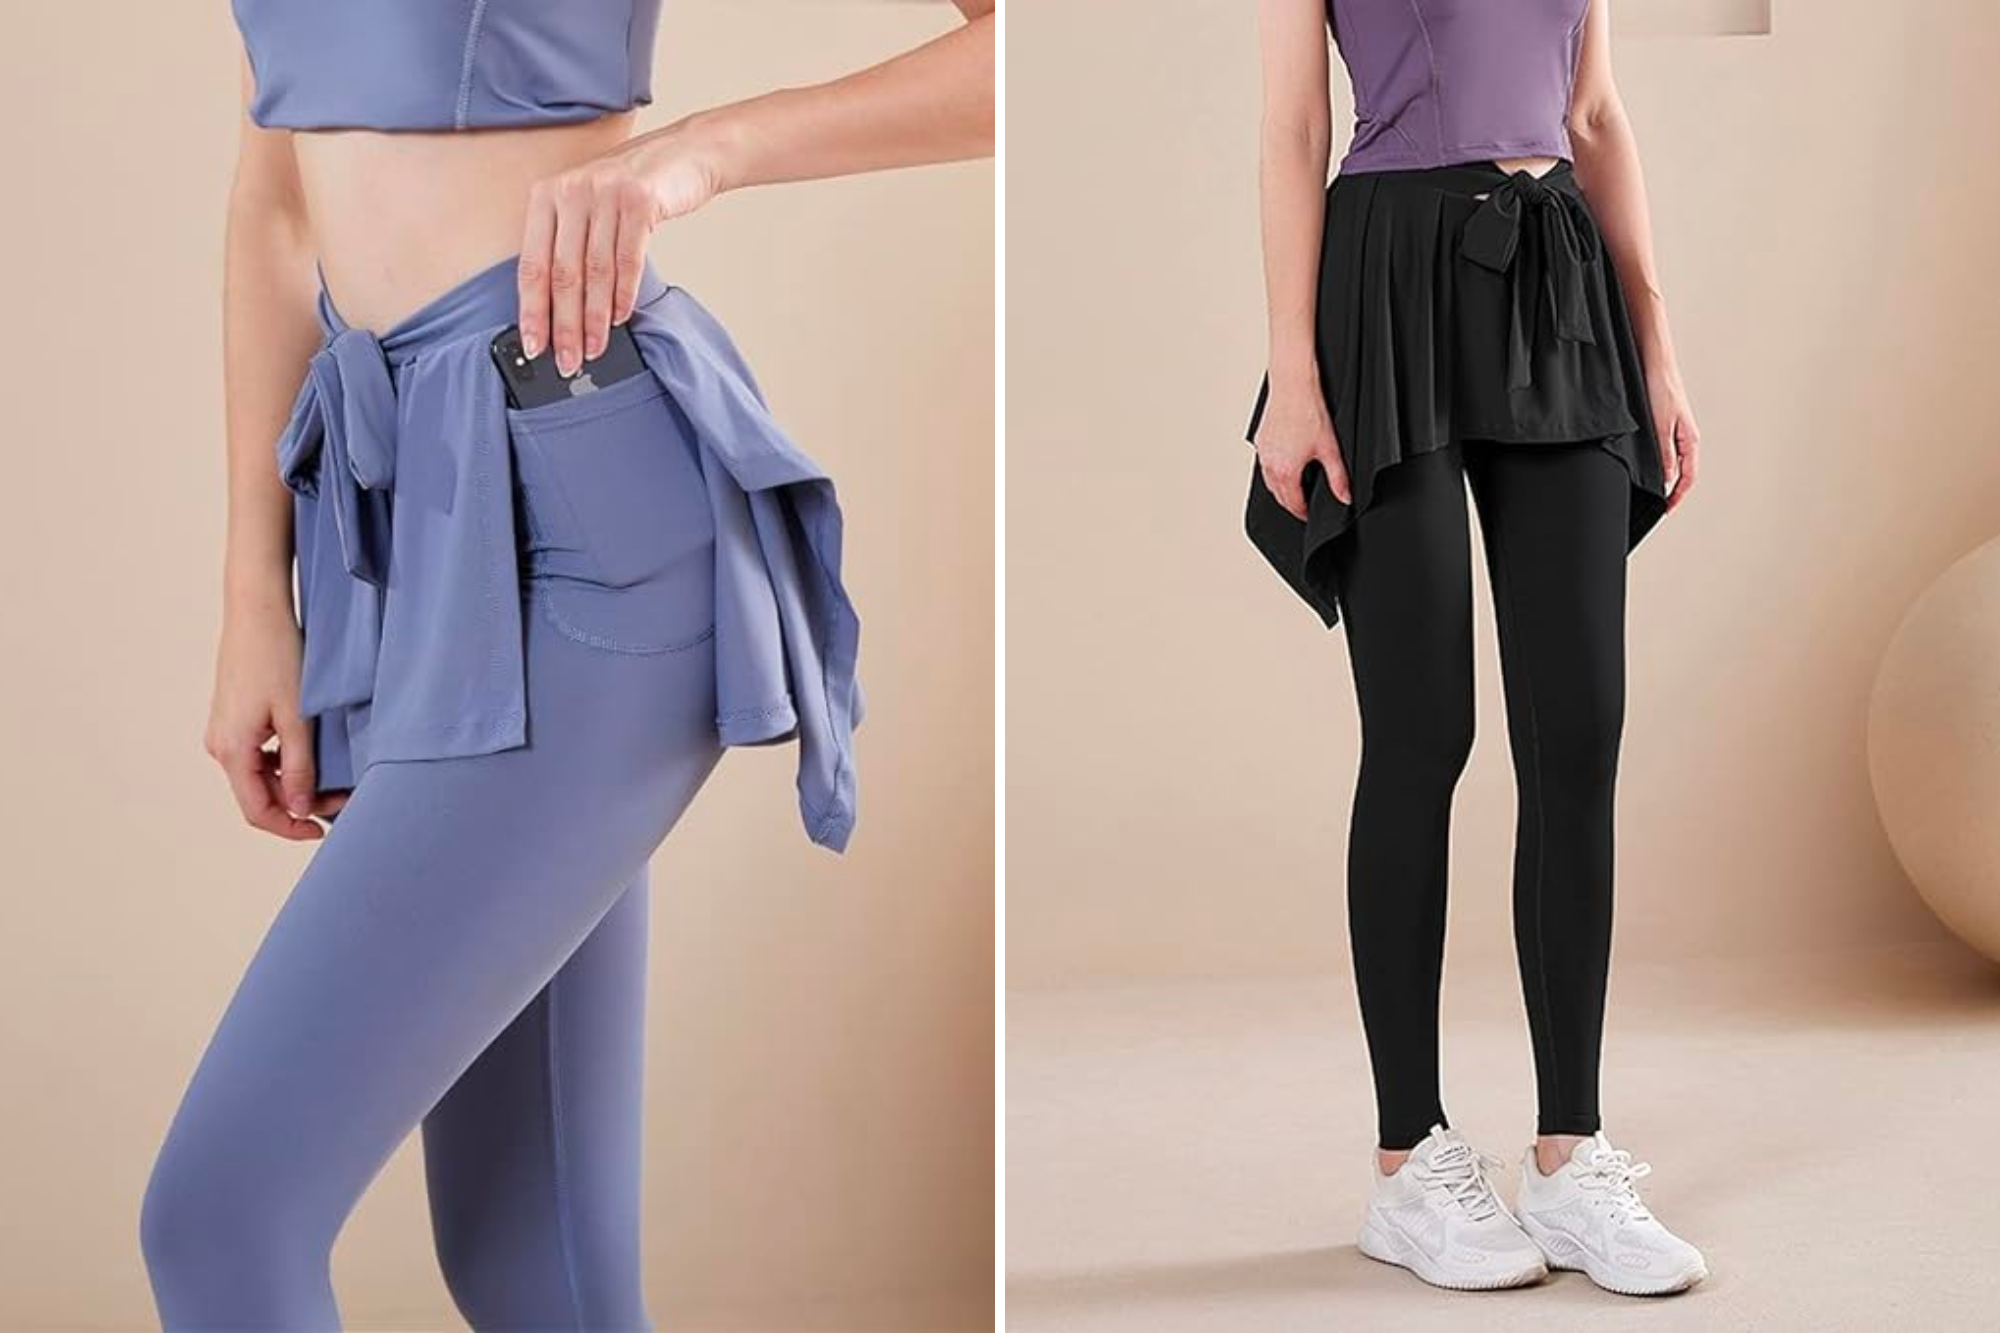 Do any skirts or dresses come with leggings built in? - Quora